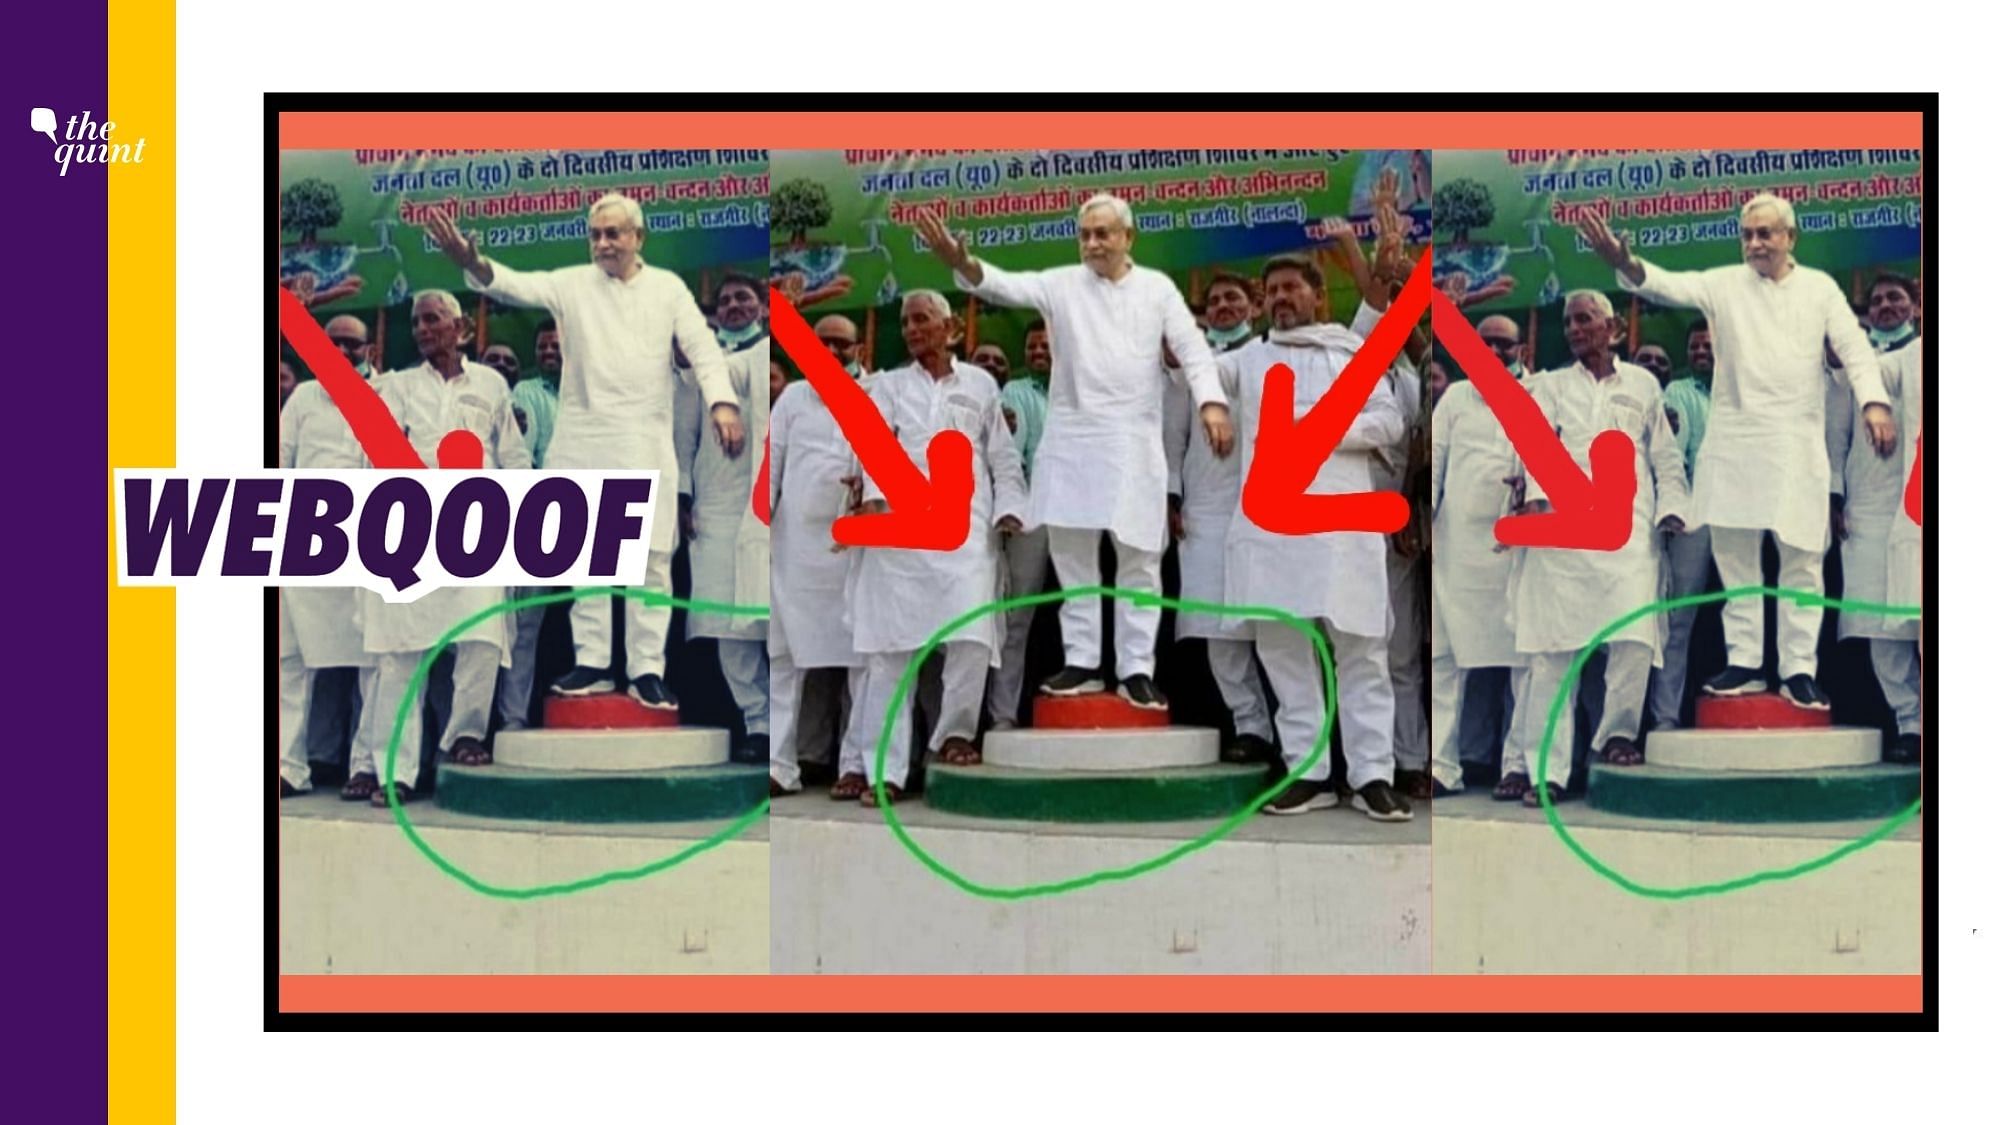 Not only has the face of Nitish Kumar been morphed into the viral image, but even the banner behind the leader has been put to falsely portray that the image is from Nitish Kumar’s programme.